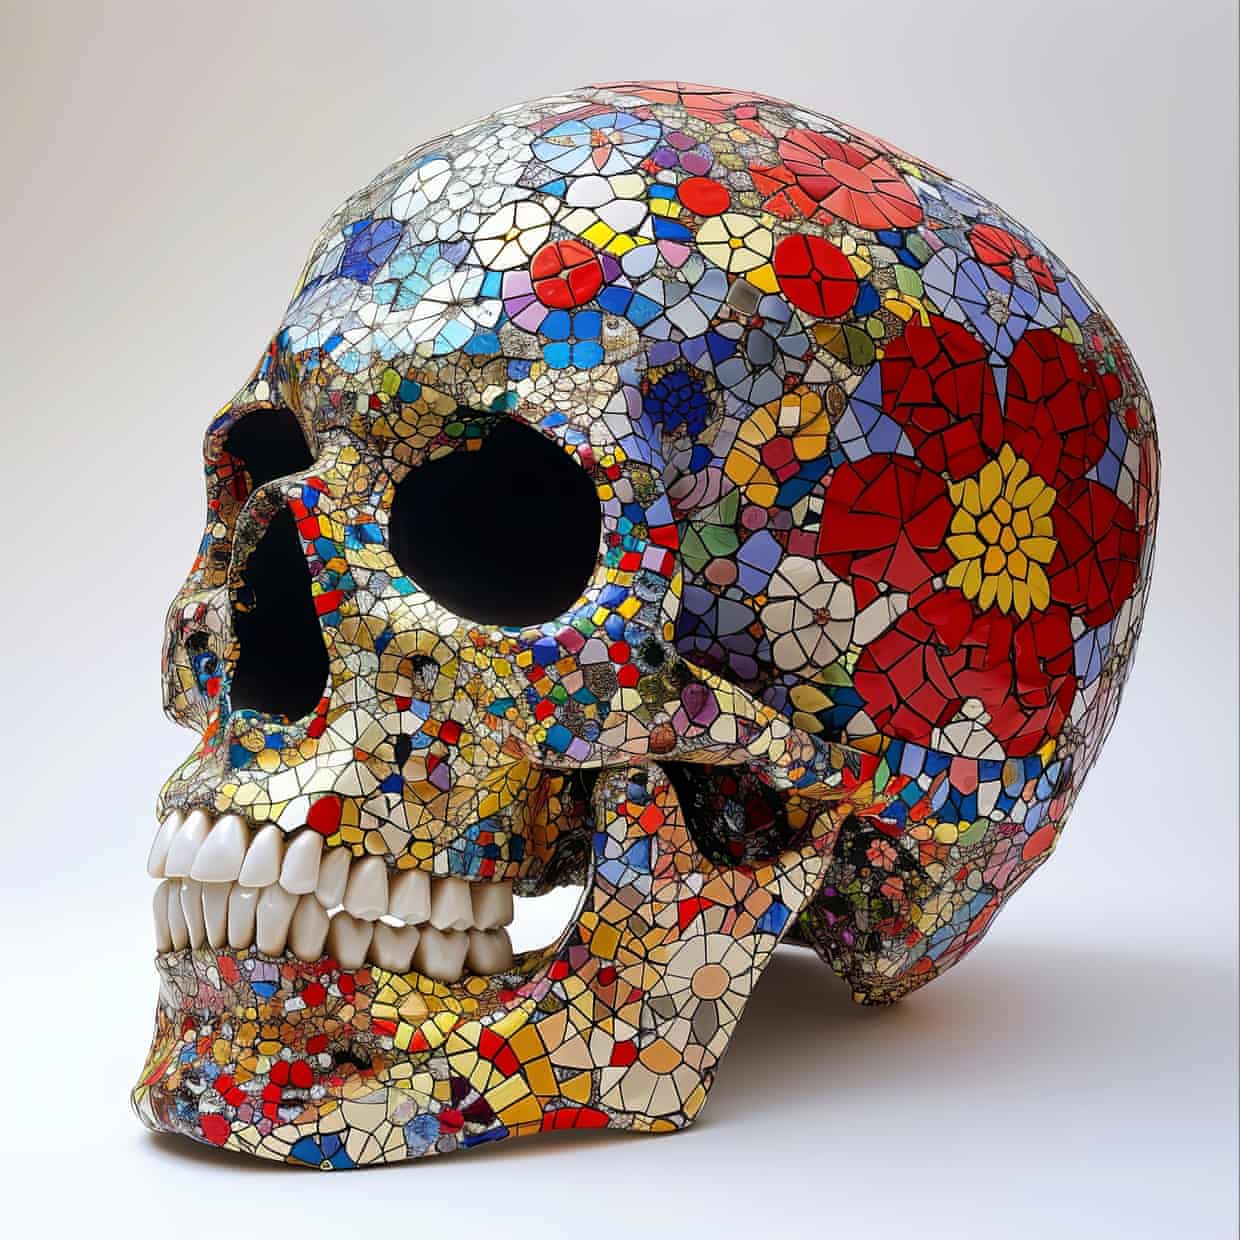 An AI rendering by Midjourney based on one of Damien Hirst’s ‘spin skull’ creations. Illustration: micwhit/Midjourney